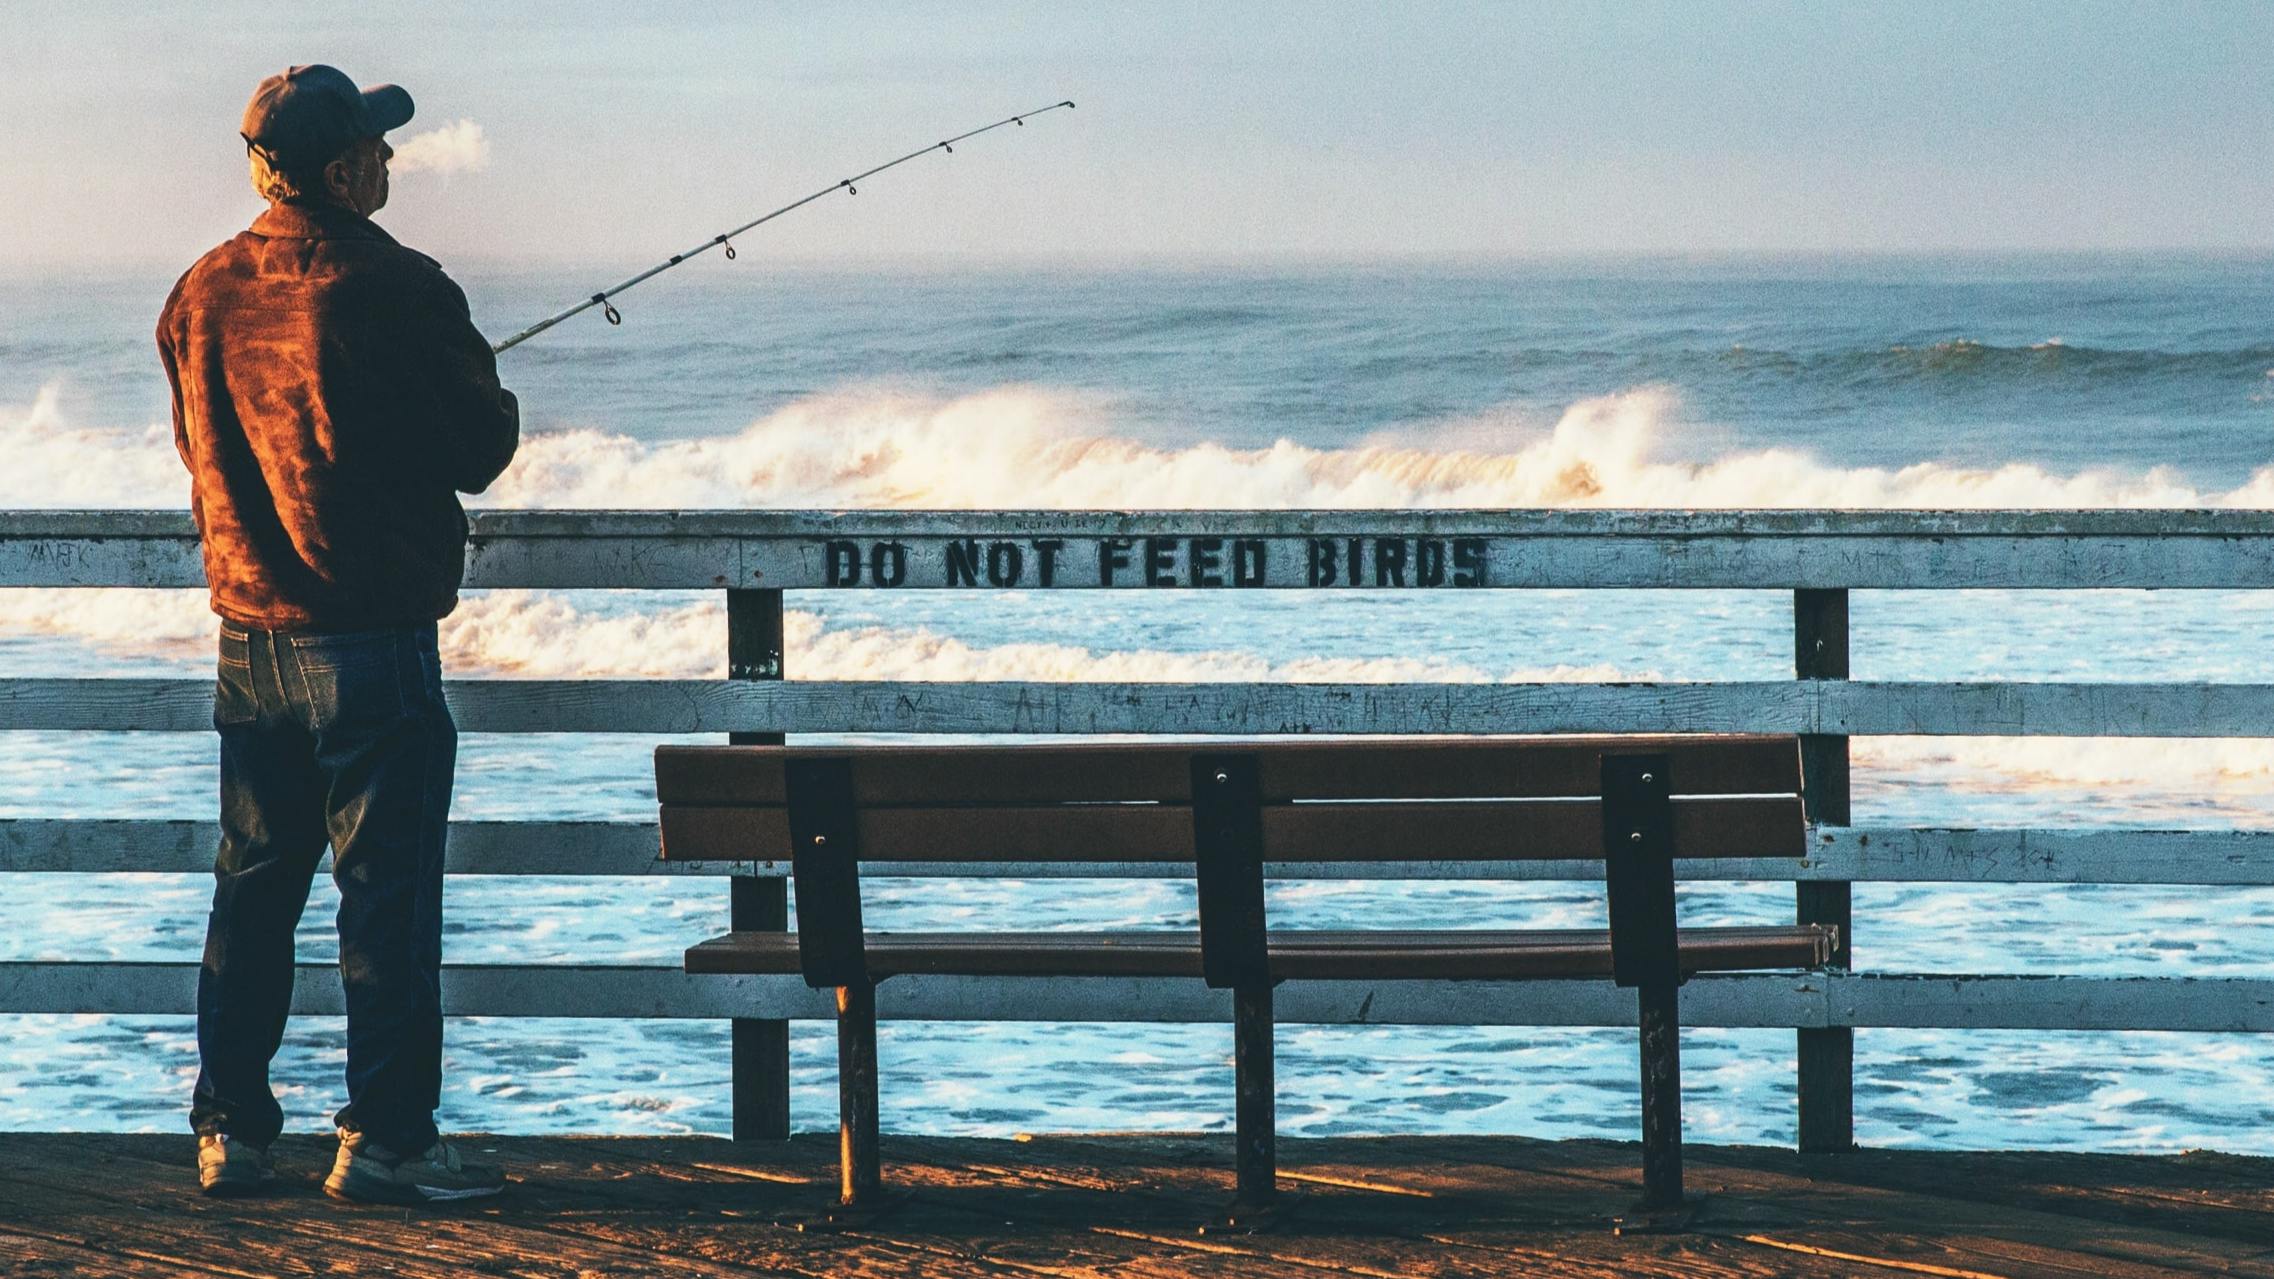 A man fishes off of a pier with waves crashing in the background. Painted in black on the white railing of the pier is "DO NOT FEED BIRDS."